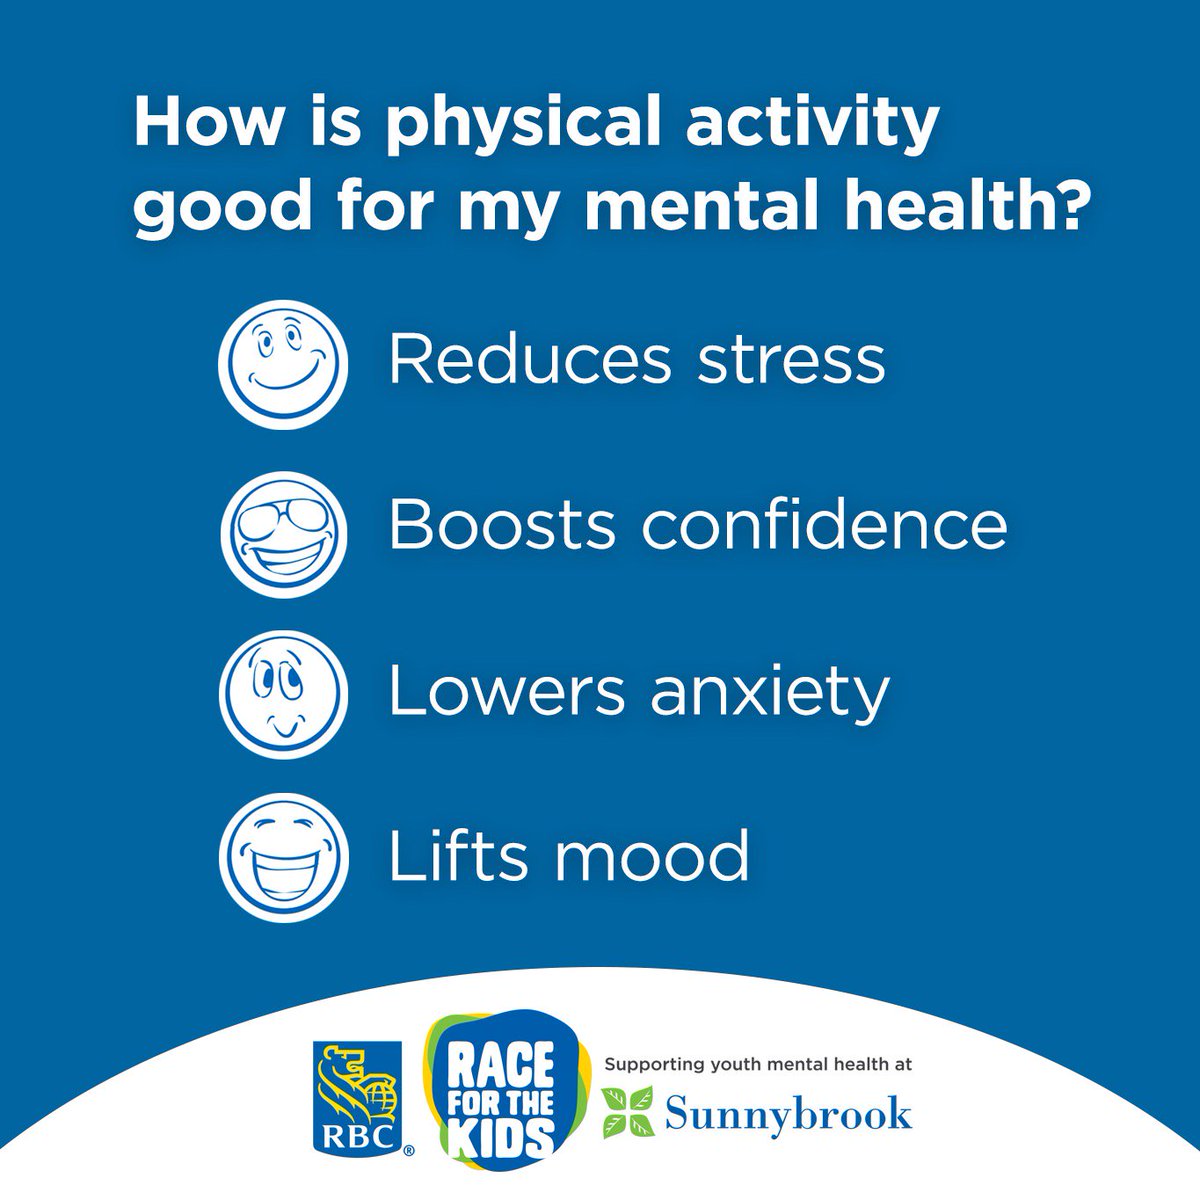 Today is National Health & Fitness Day! Improve your mental health through physical activity. #RBCRaceForTheKids #WhyIRunTO #FittestNation